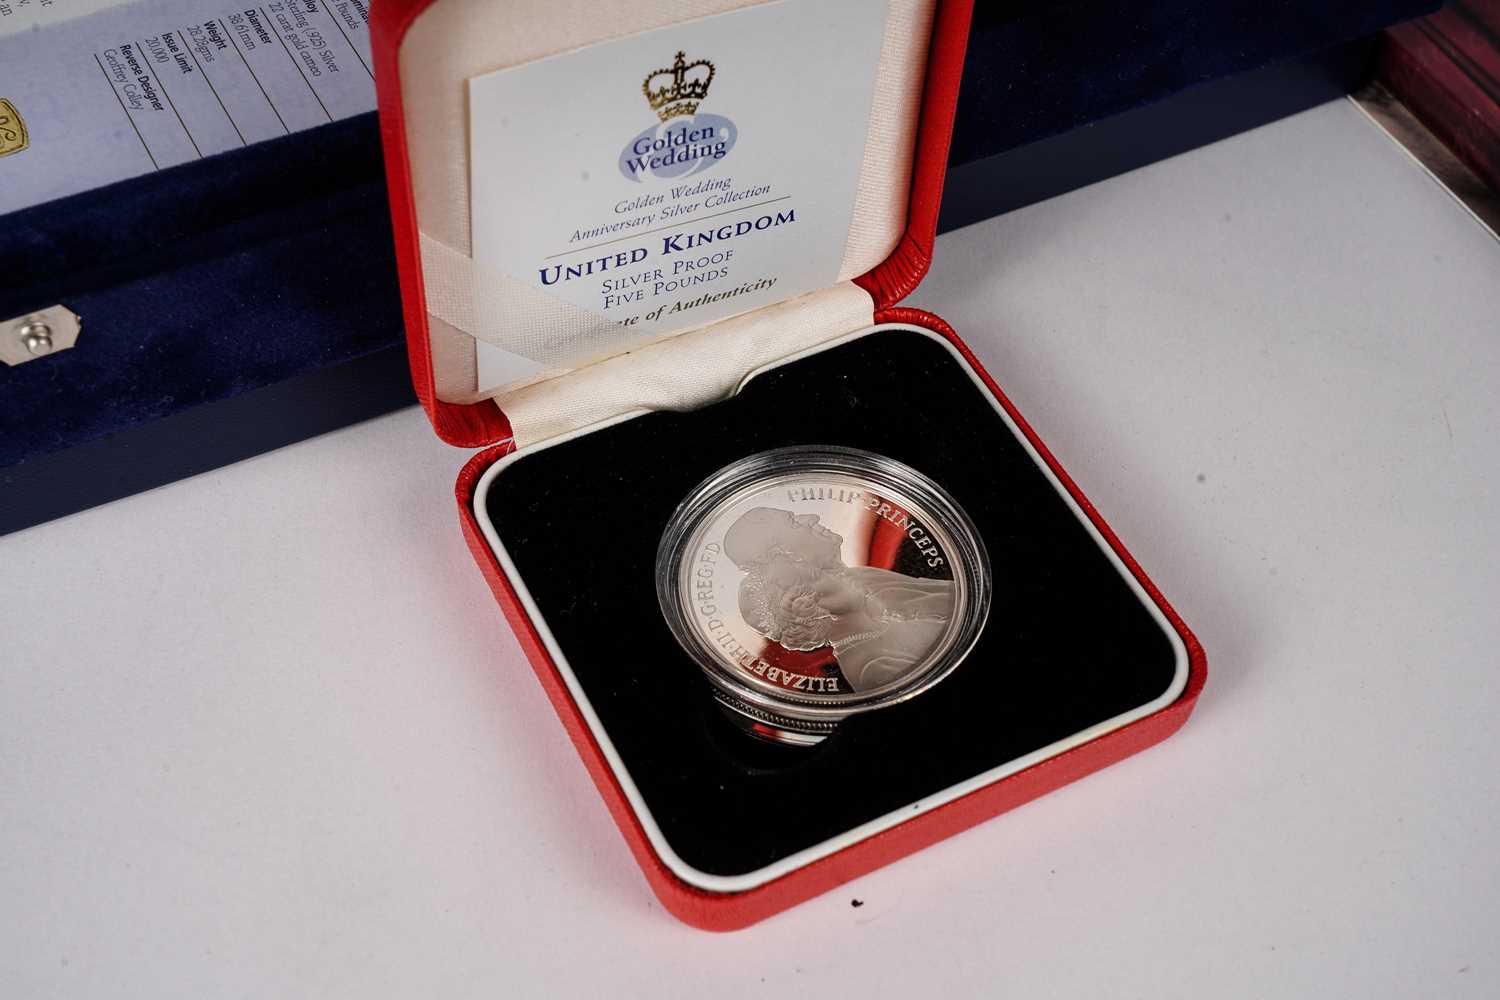 The Royal Mint Westminster Queen Elizabeth II The Golden Wedding Anniversary coin collection - Image 7 of 8